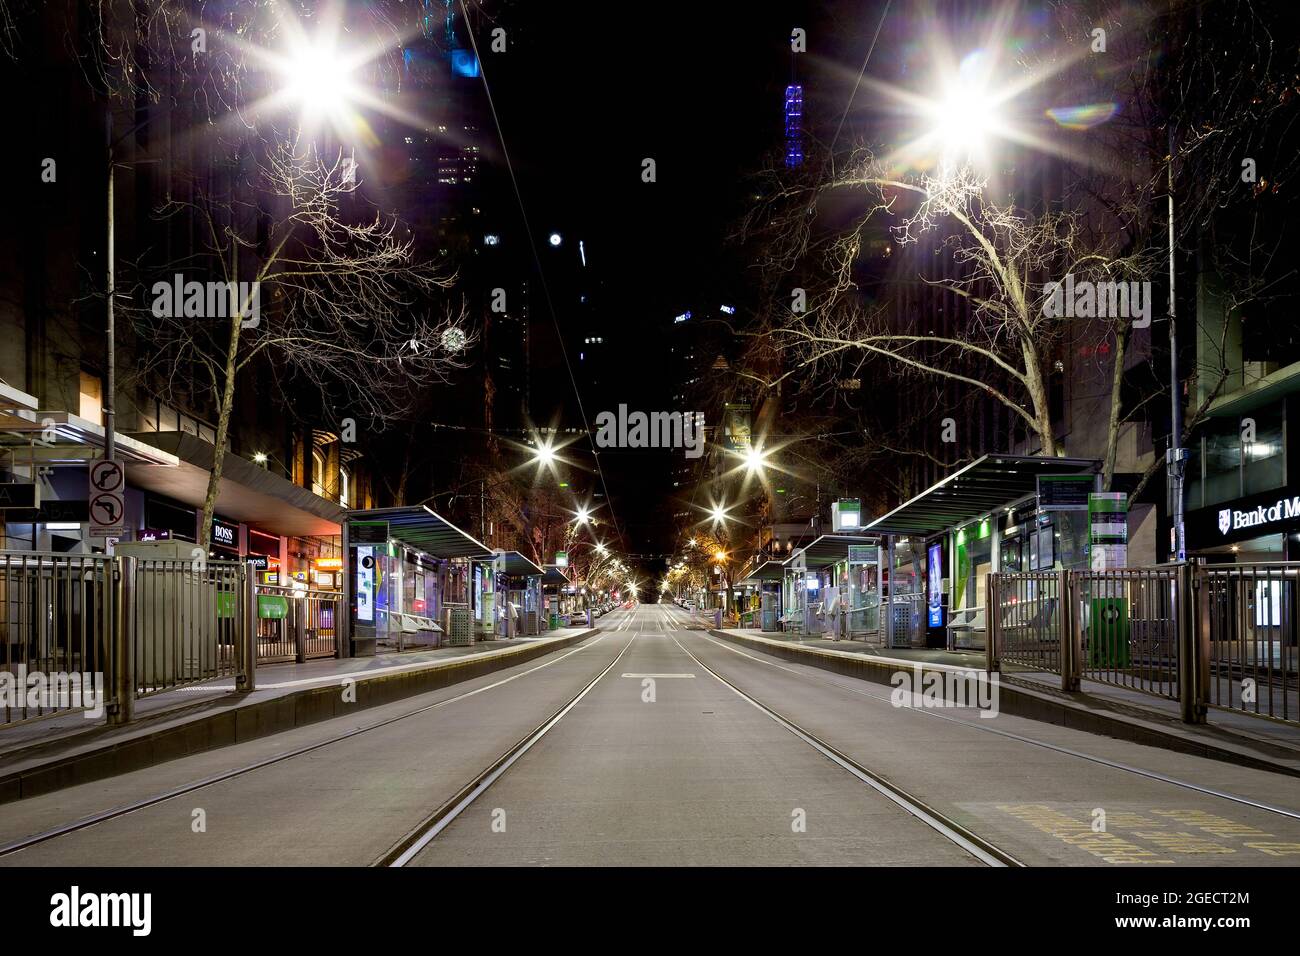 Melbourne, Australia, 26 August, 2020. Melbourne under curfew, a city devoid of life. A view of a tram stop on Collins Street. Credit: Dave Hewison/Speed Media/Alamy Live News Stock Photo